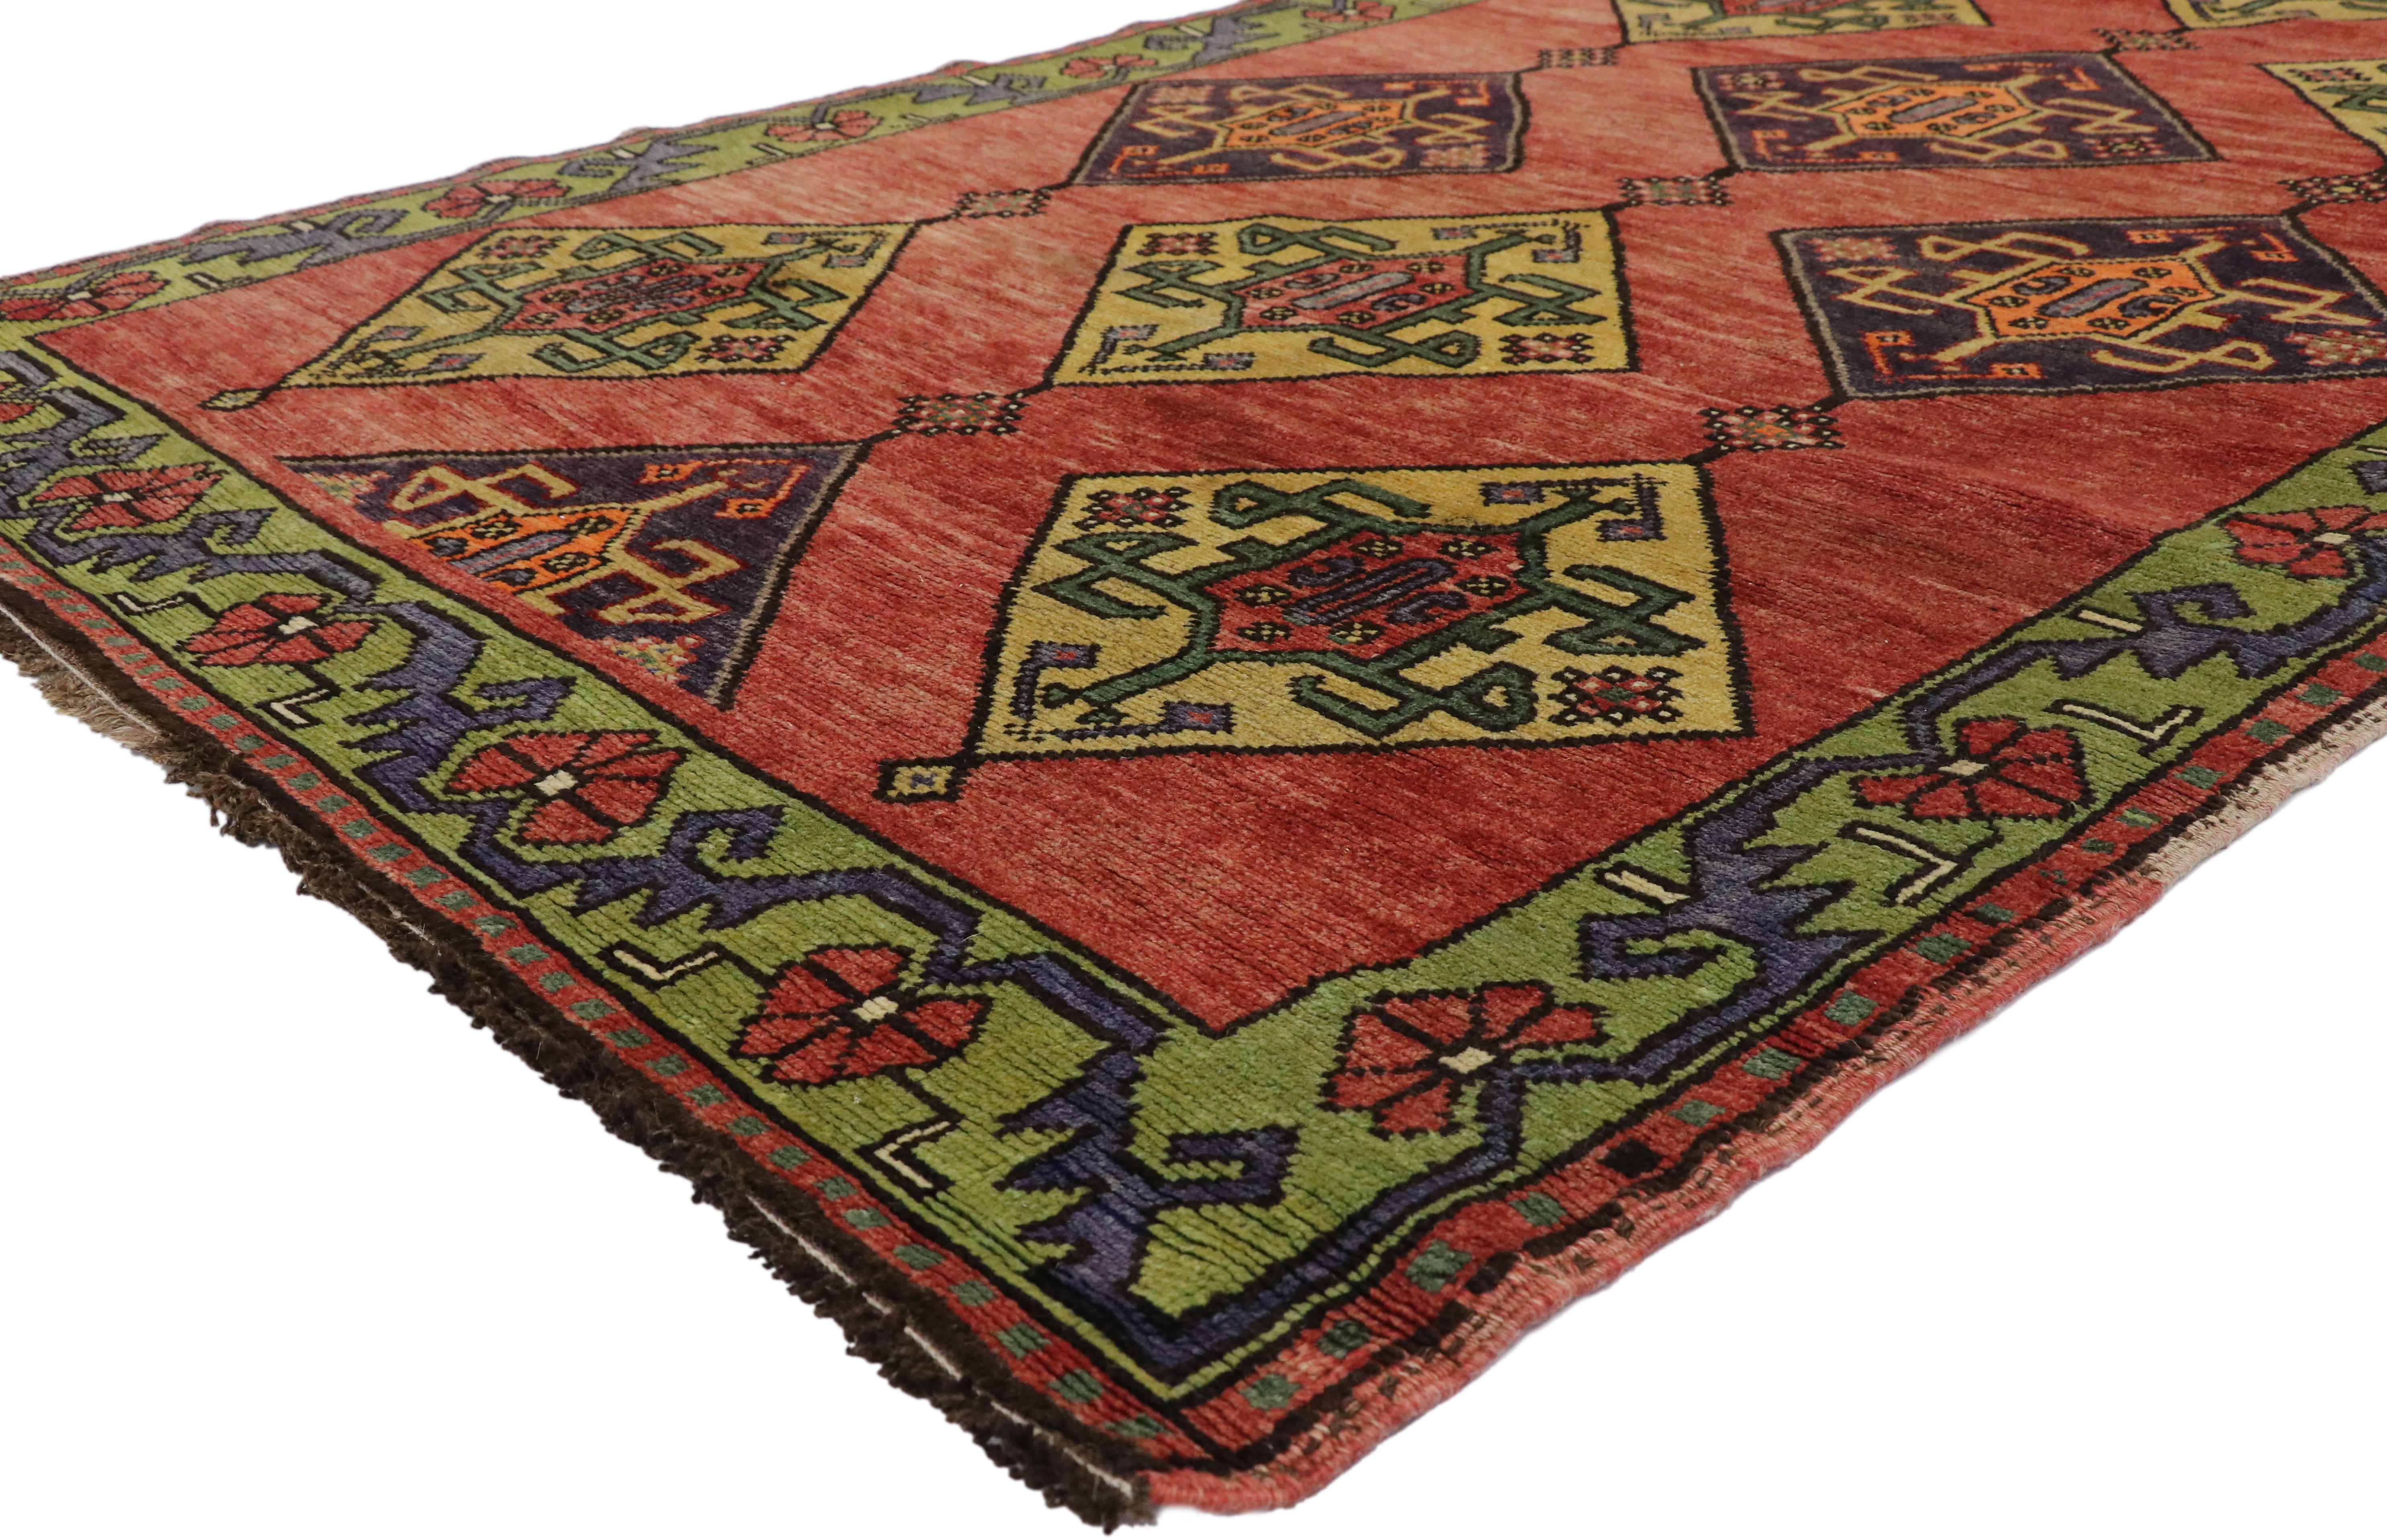 52177 Vintage Turkish Oushak Runner with Art Deco Style, Wide Tribal Hallway Runner. With a bold geometric pattern and striking appeal, this hand knotted wool vintage Turkish Oushak runner can beautifully blend contemporary, modern, and traditional